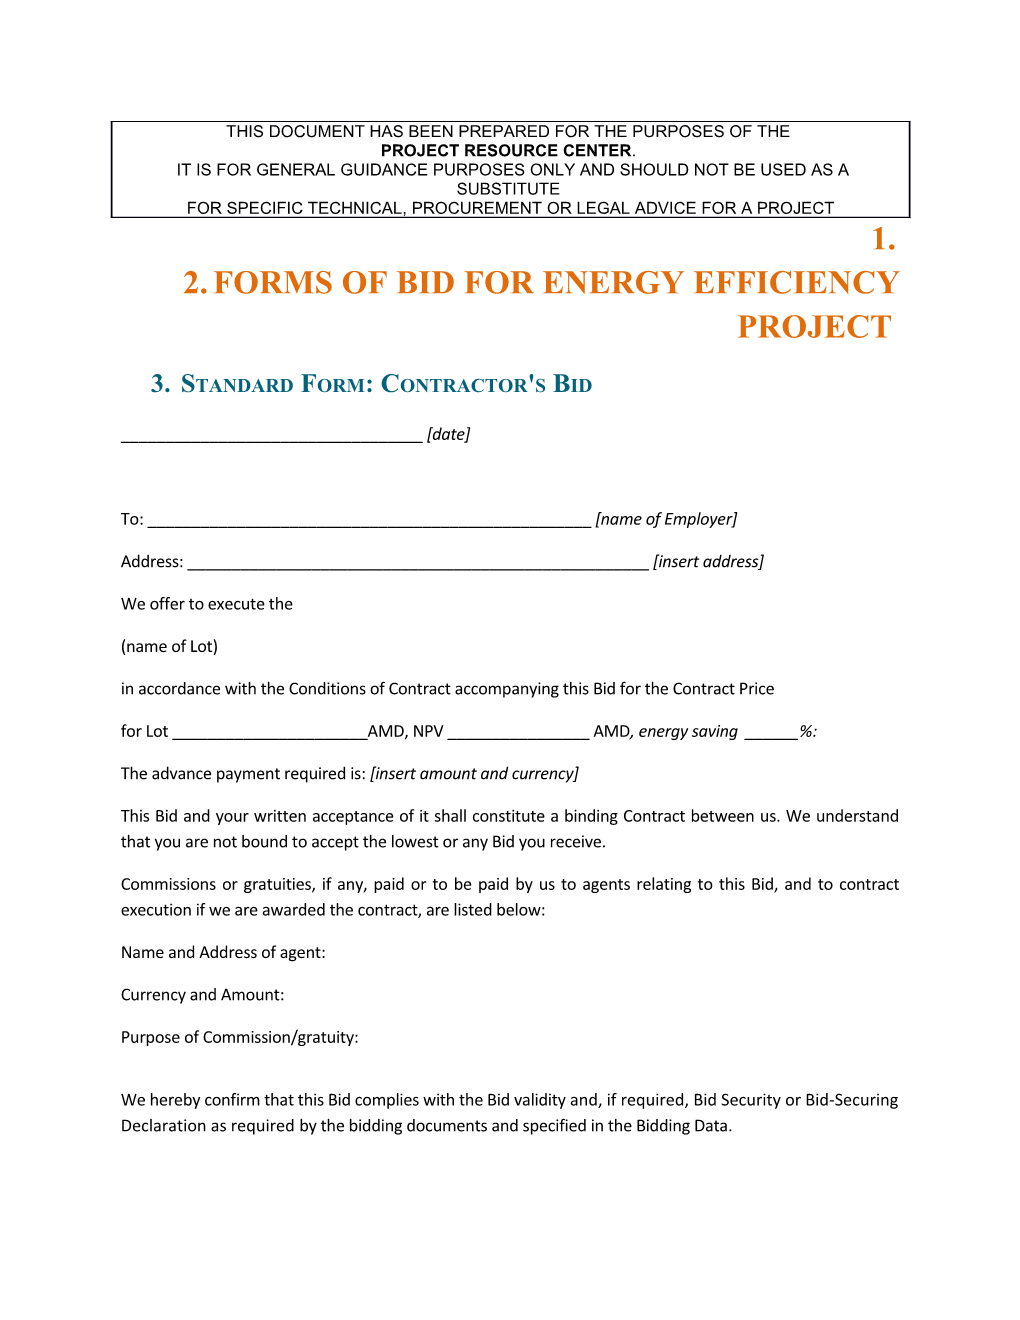 Forms of Bid for Energy Efficiency Project